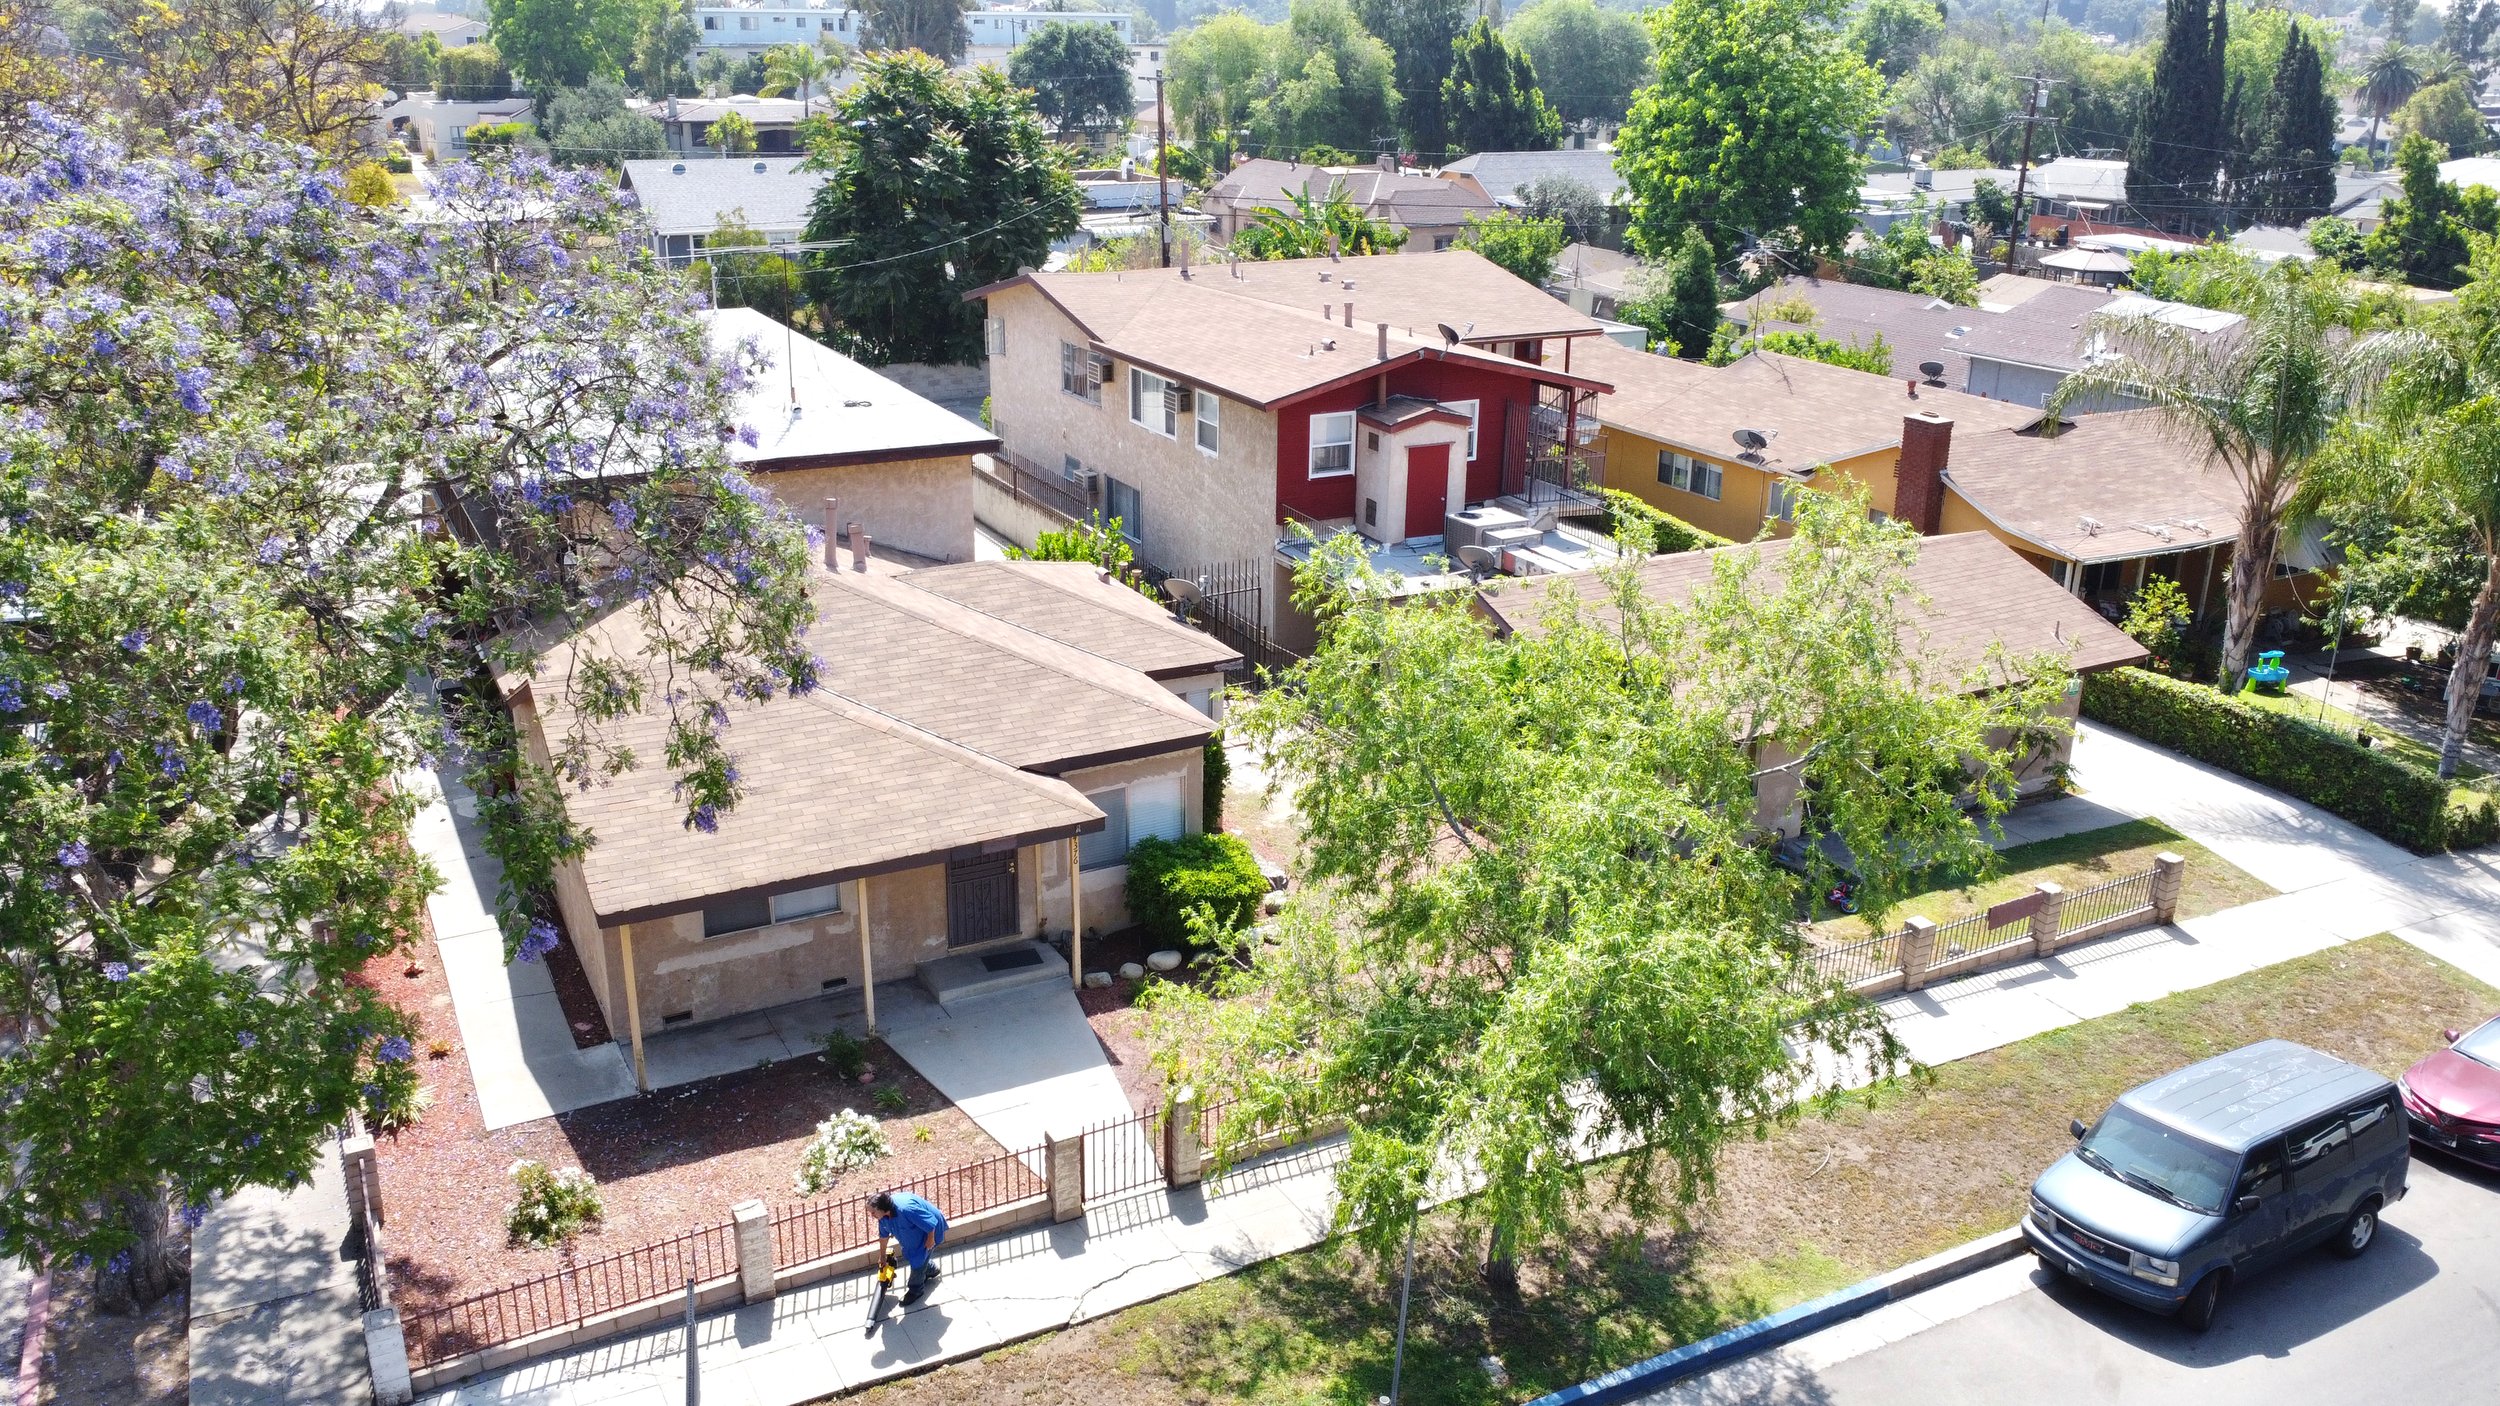 Birds eye view of townhouses with fencing .